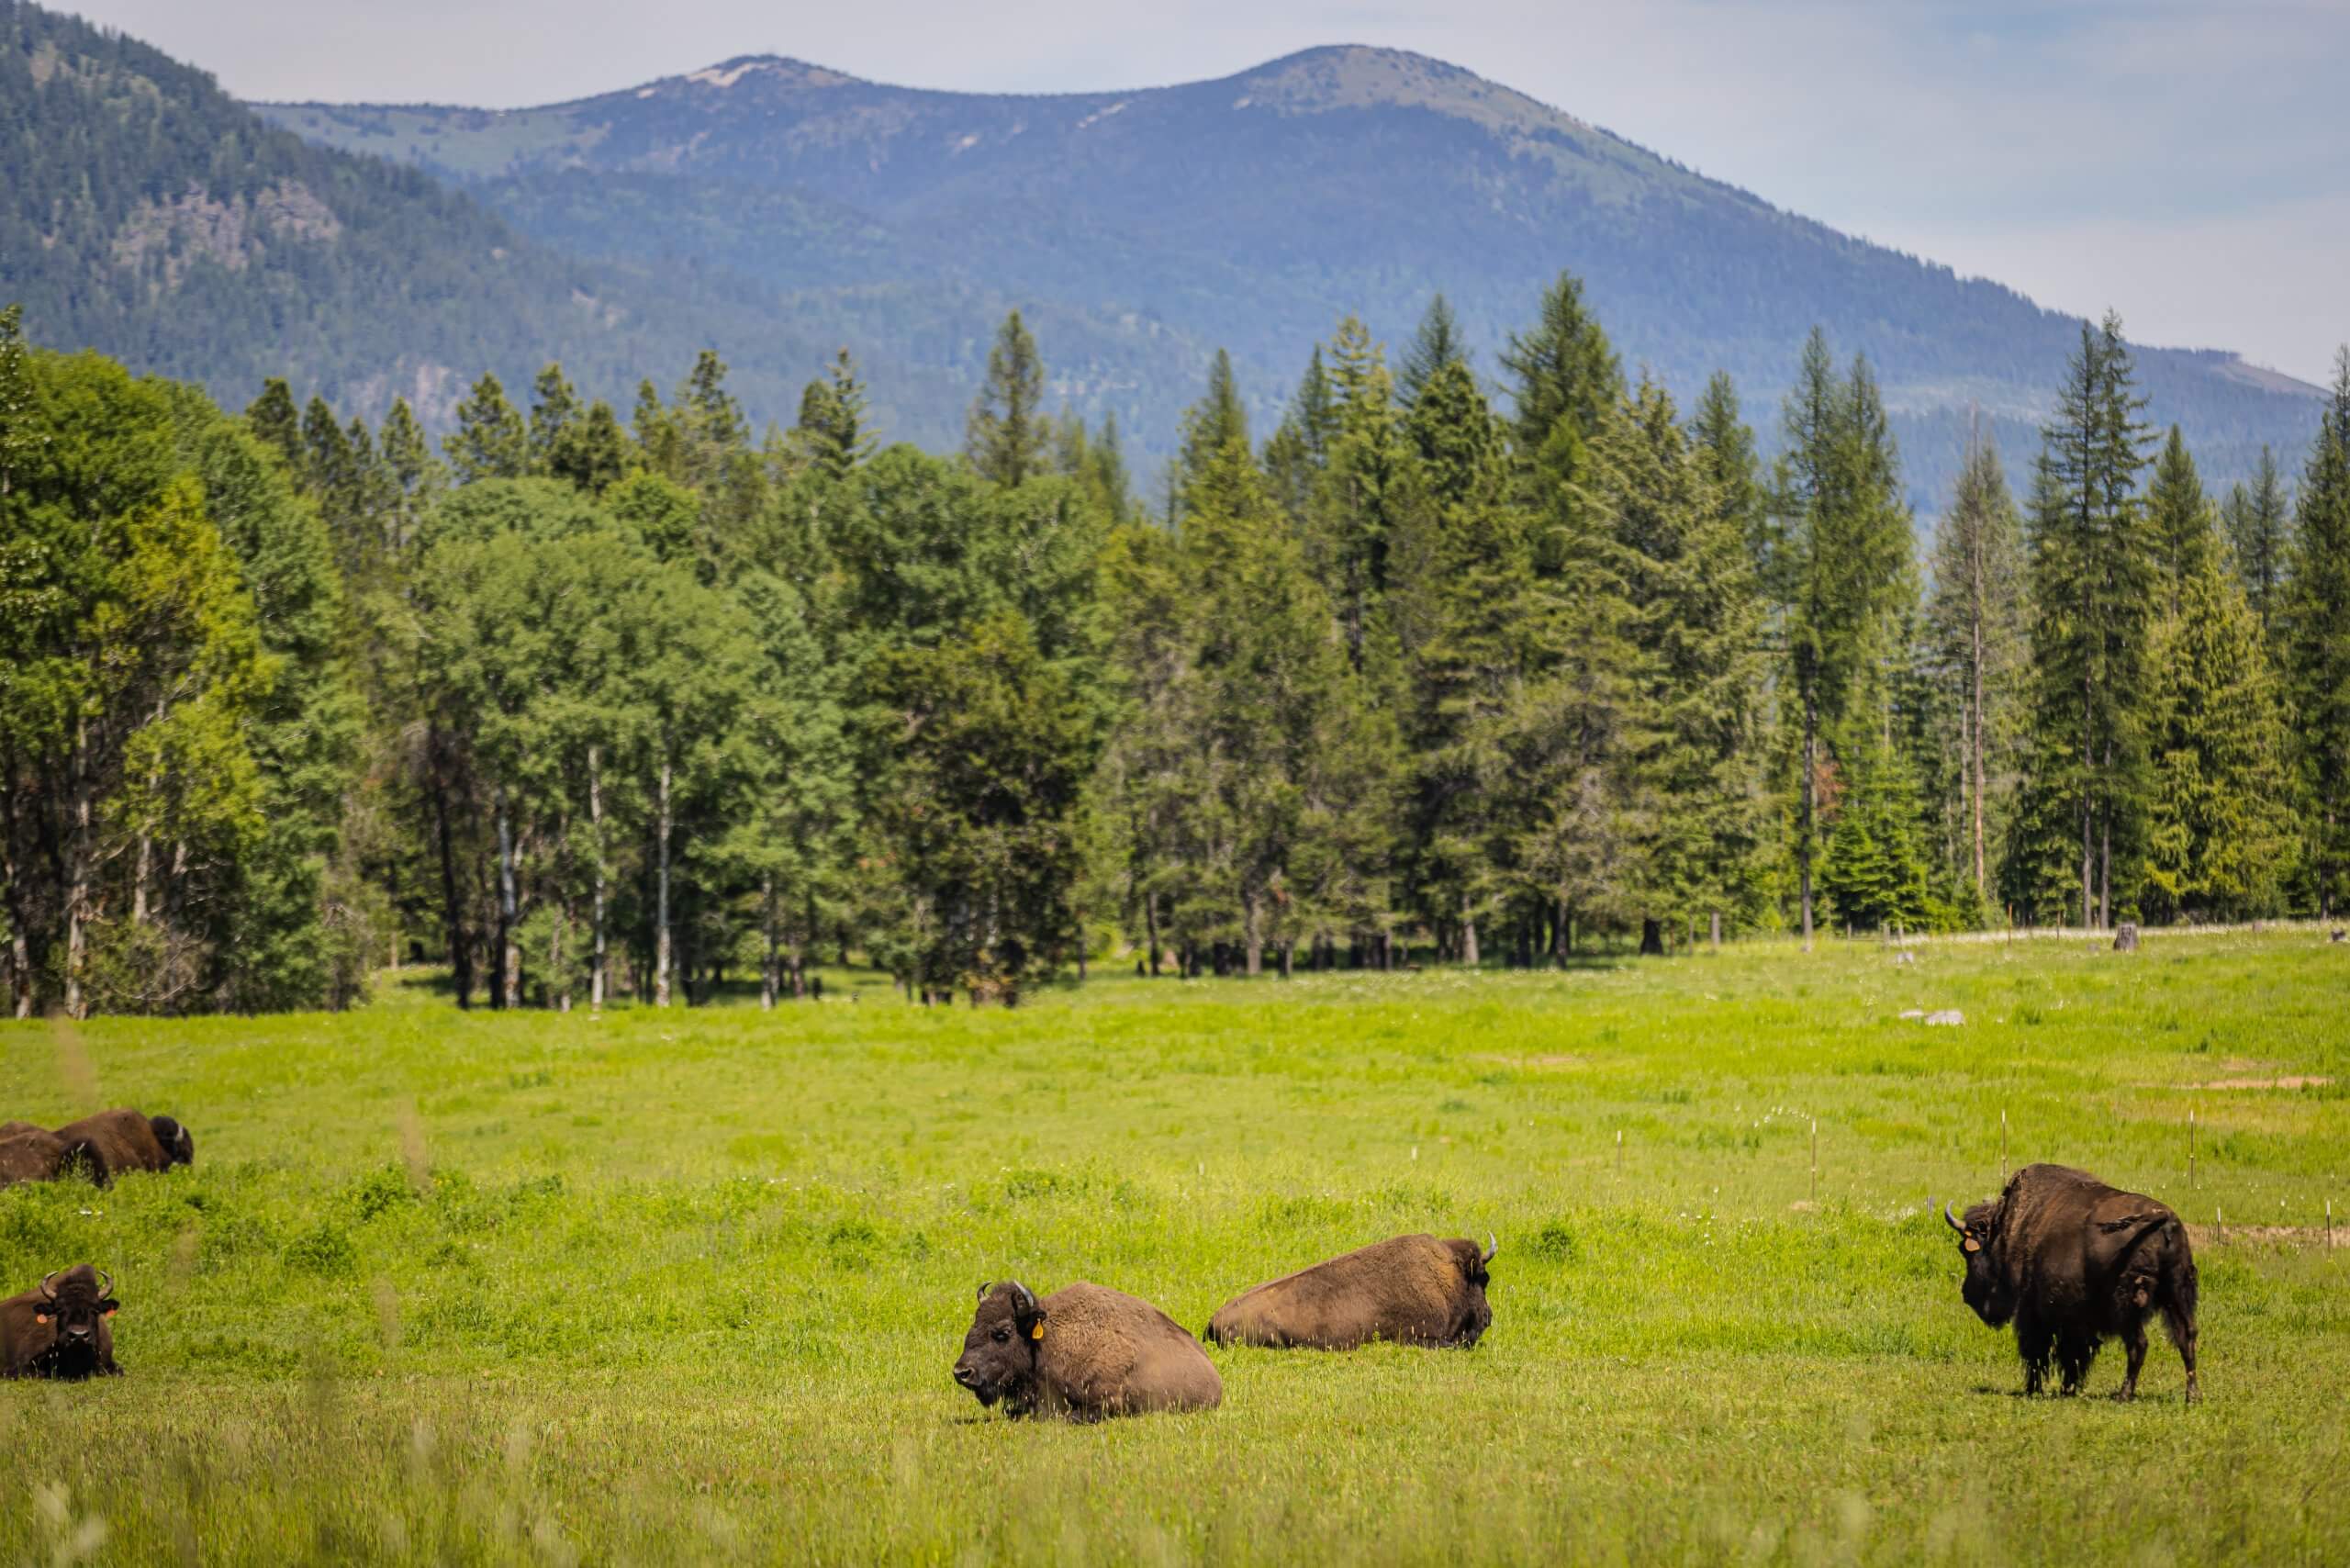 Bison grazing in a field with trees and mountains in the background.